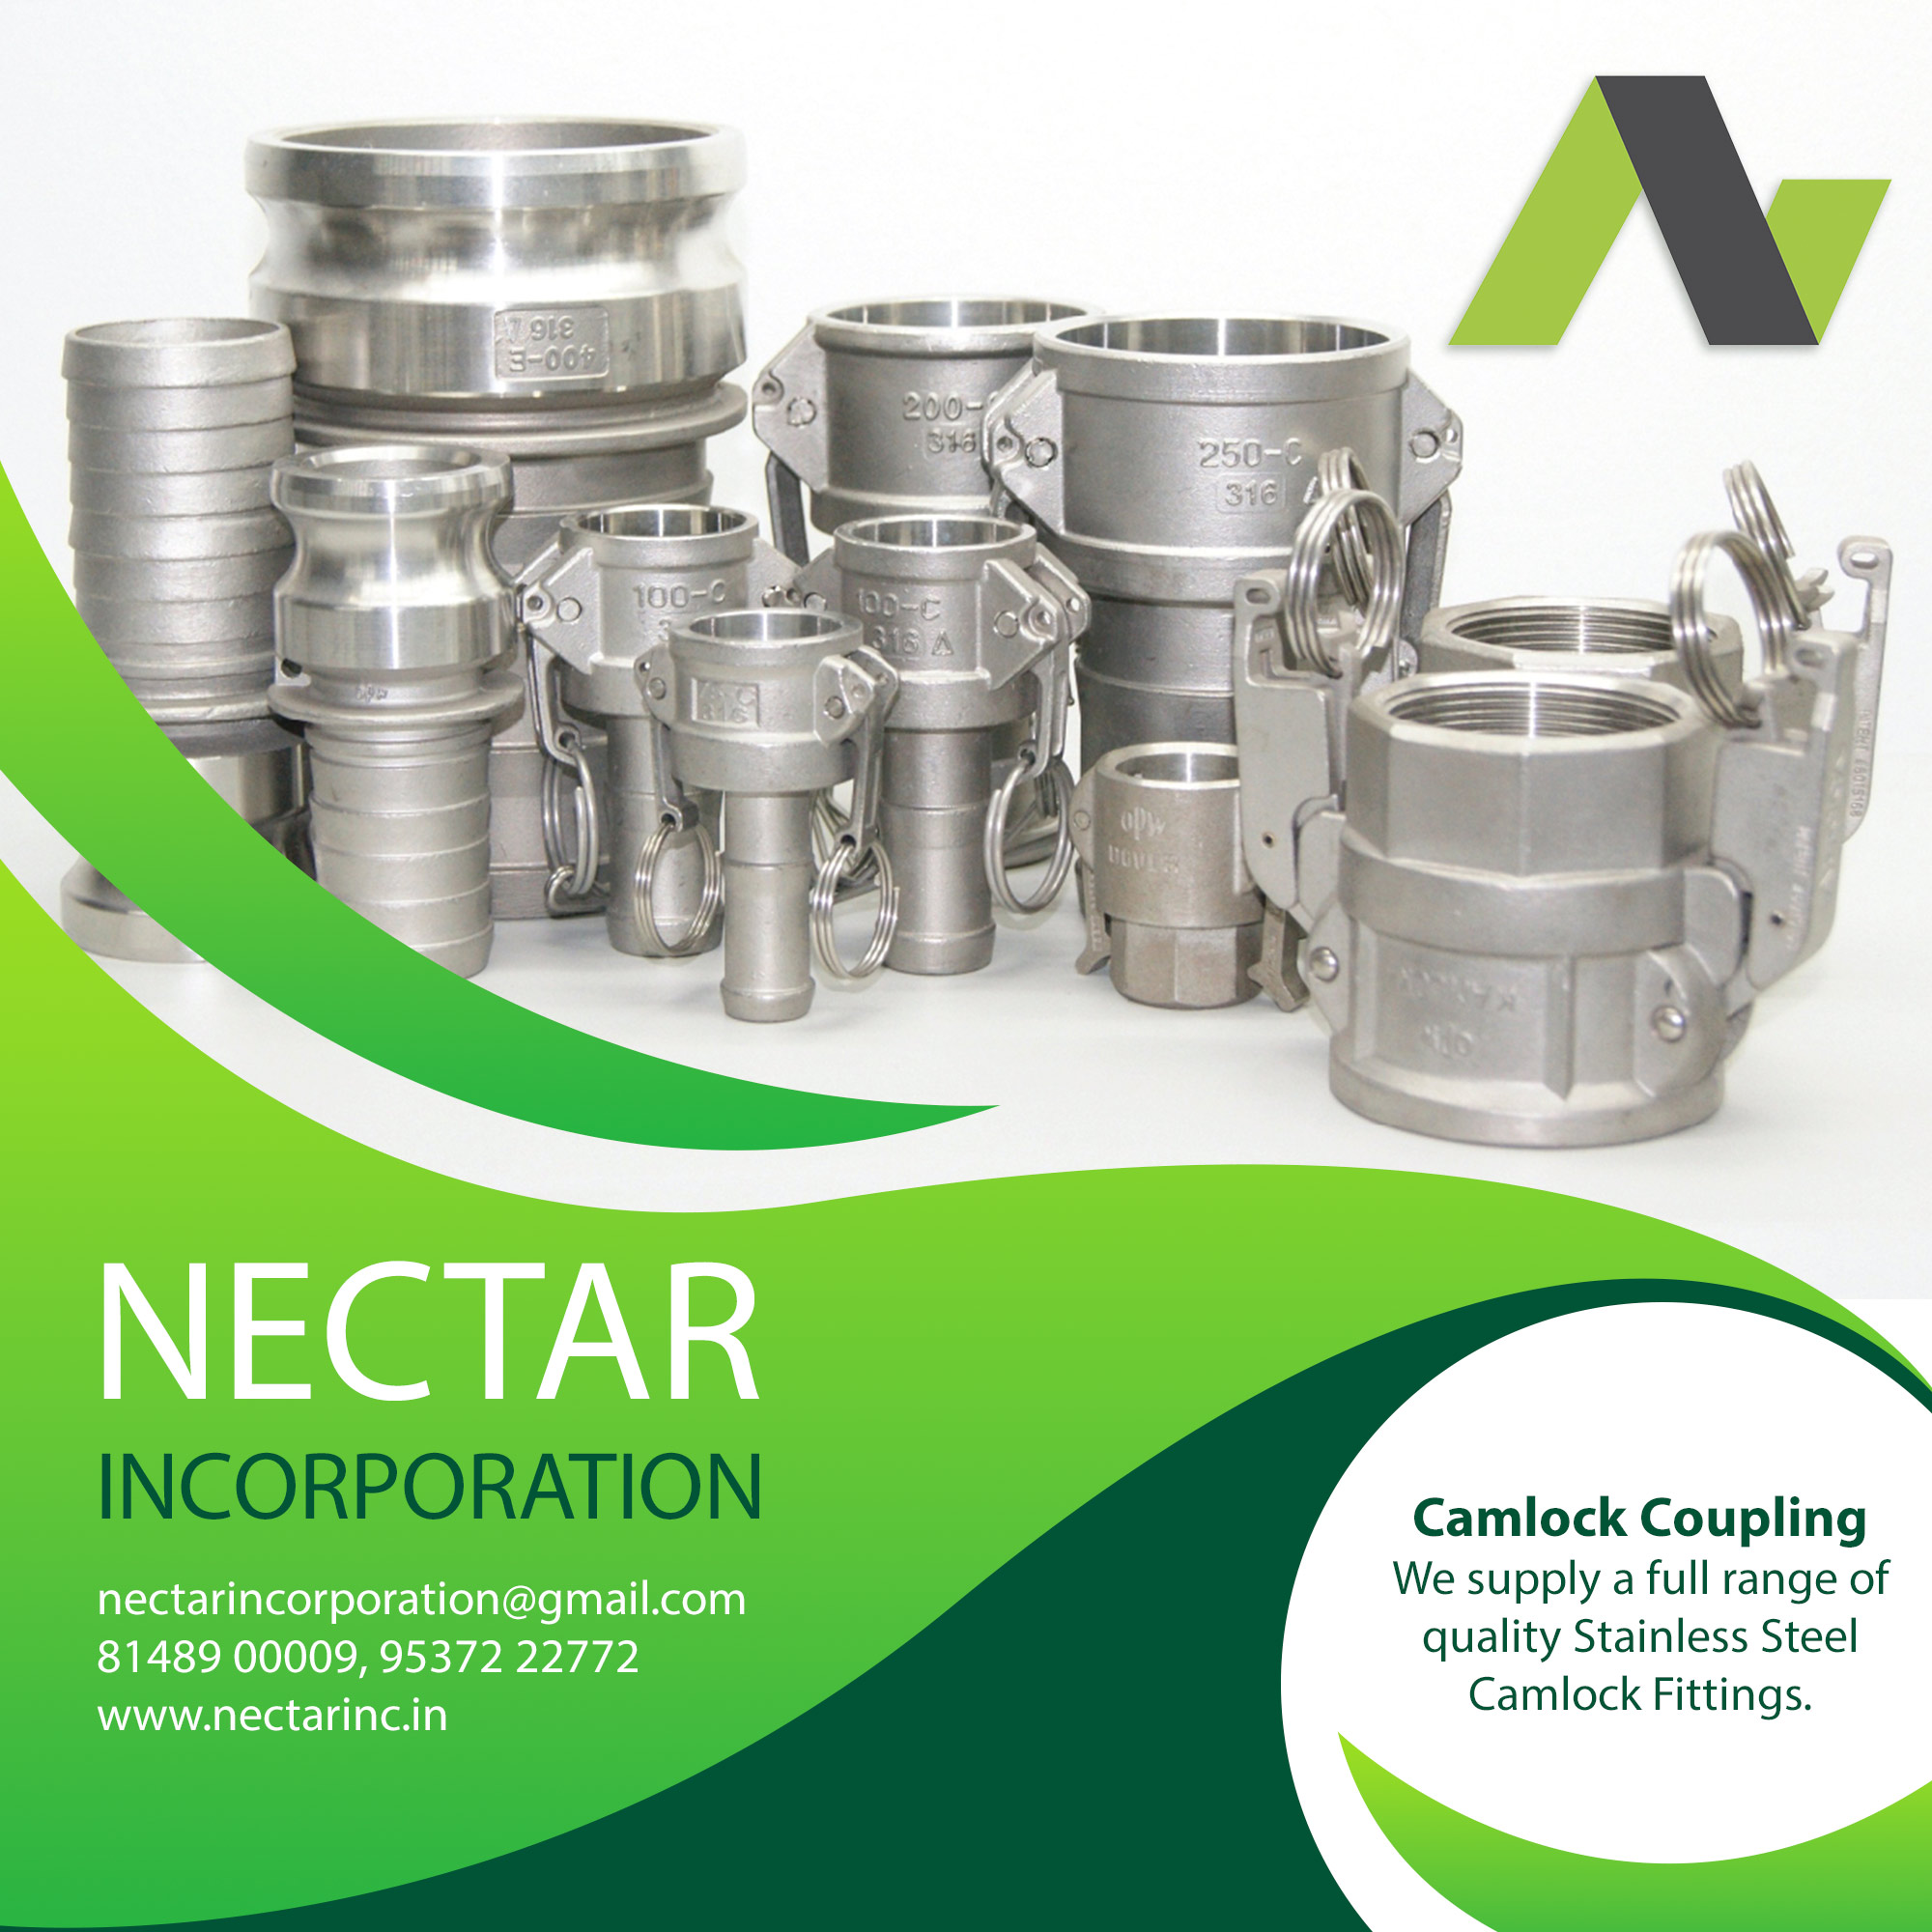 Stainless Steel Camlock Coupling from Nectar Incorporation